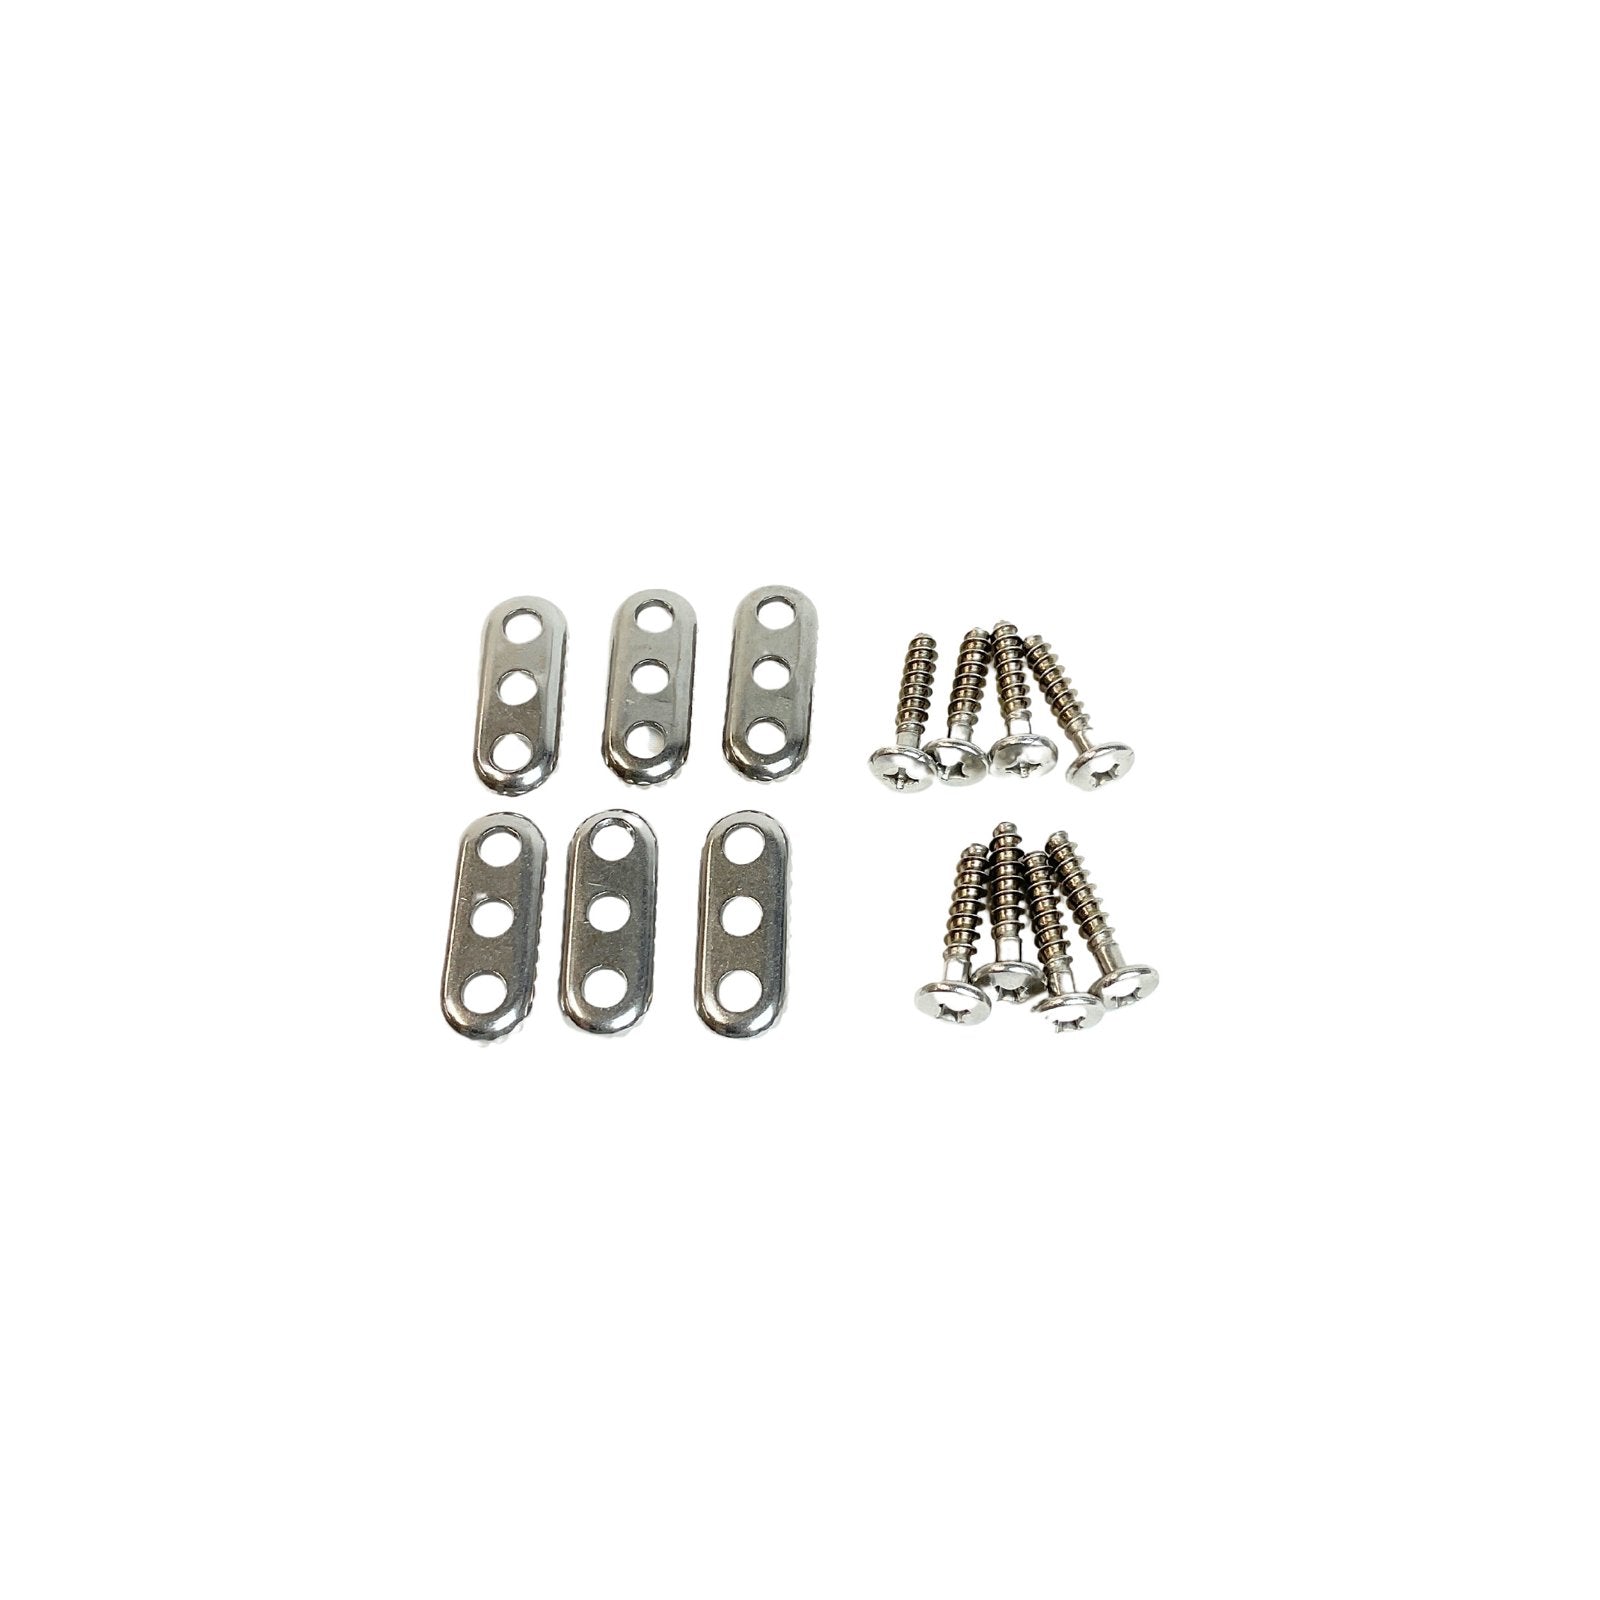 DUOTONE Screw Set incl. Washer for Footstraps (8pcs) 2024